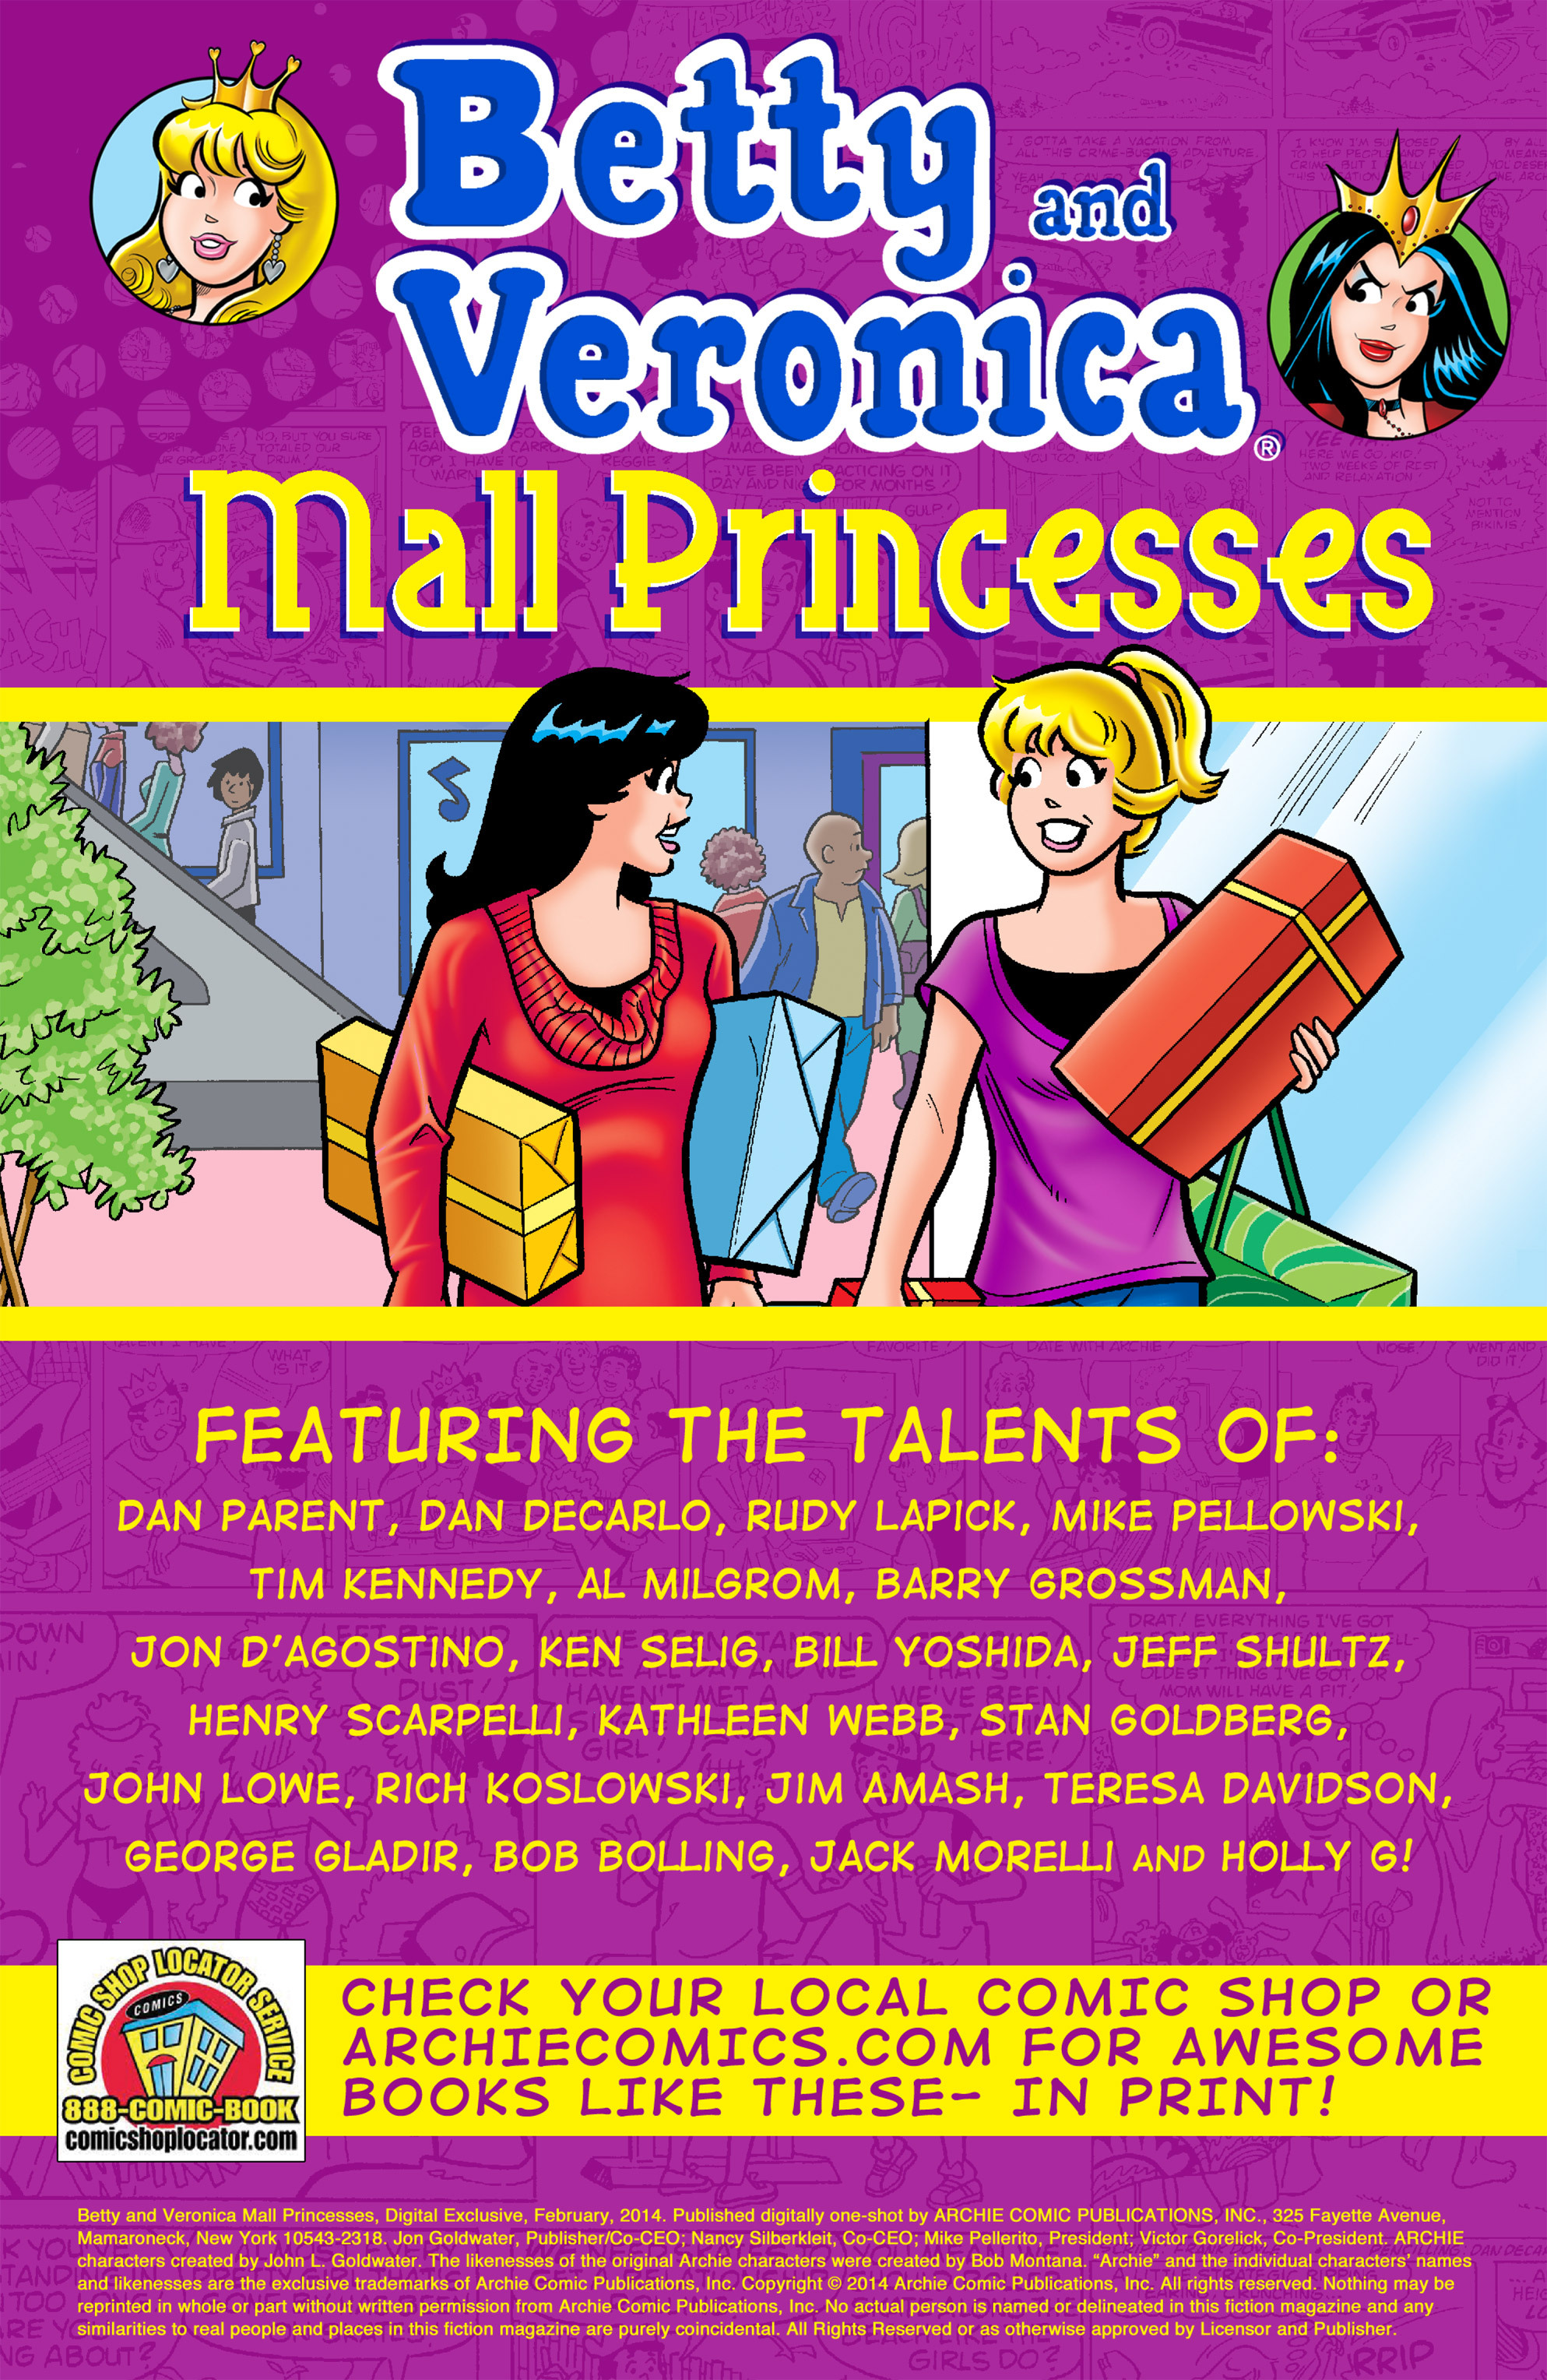 Read online Betty and Veronica: Mall Princesses comic -  Issue # TPB - 2